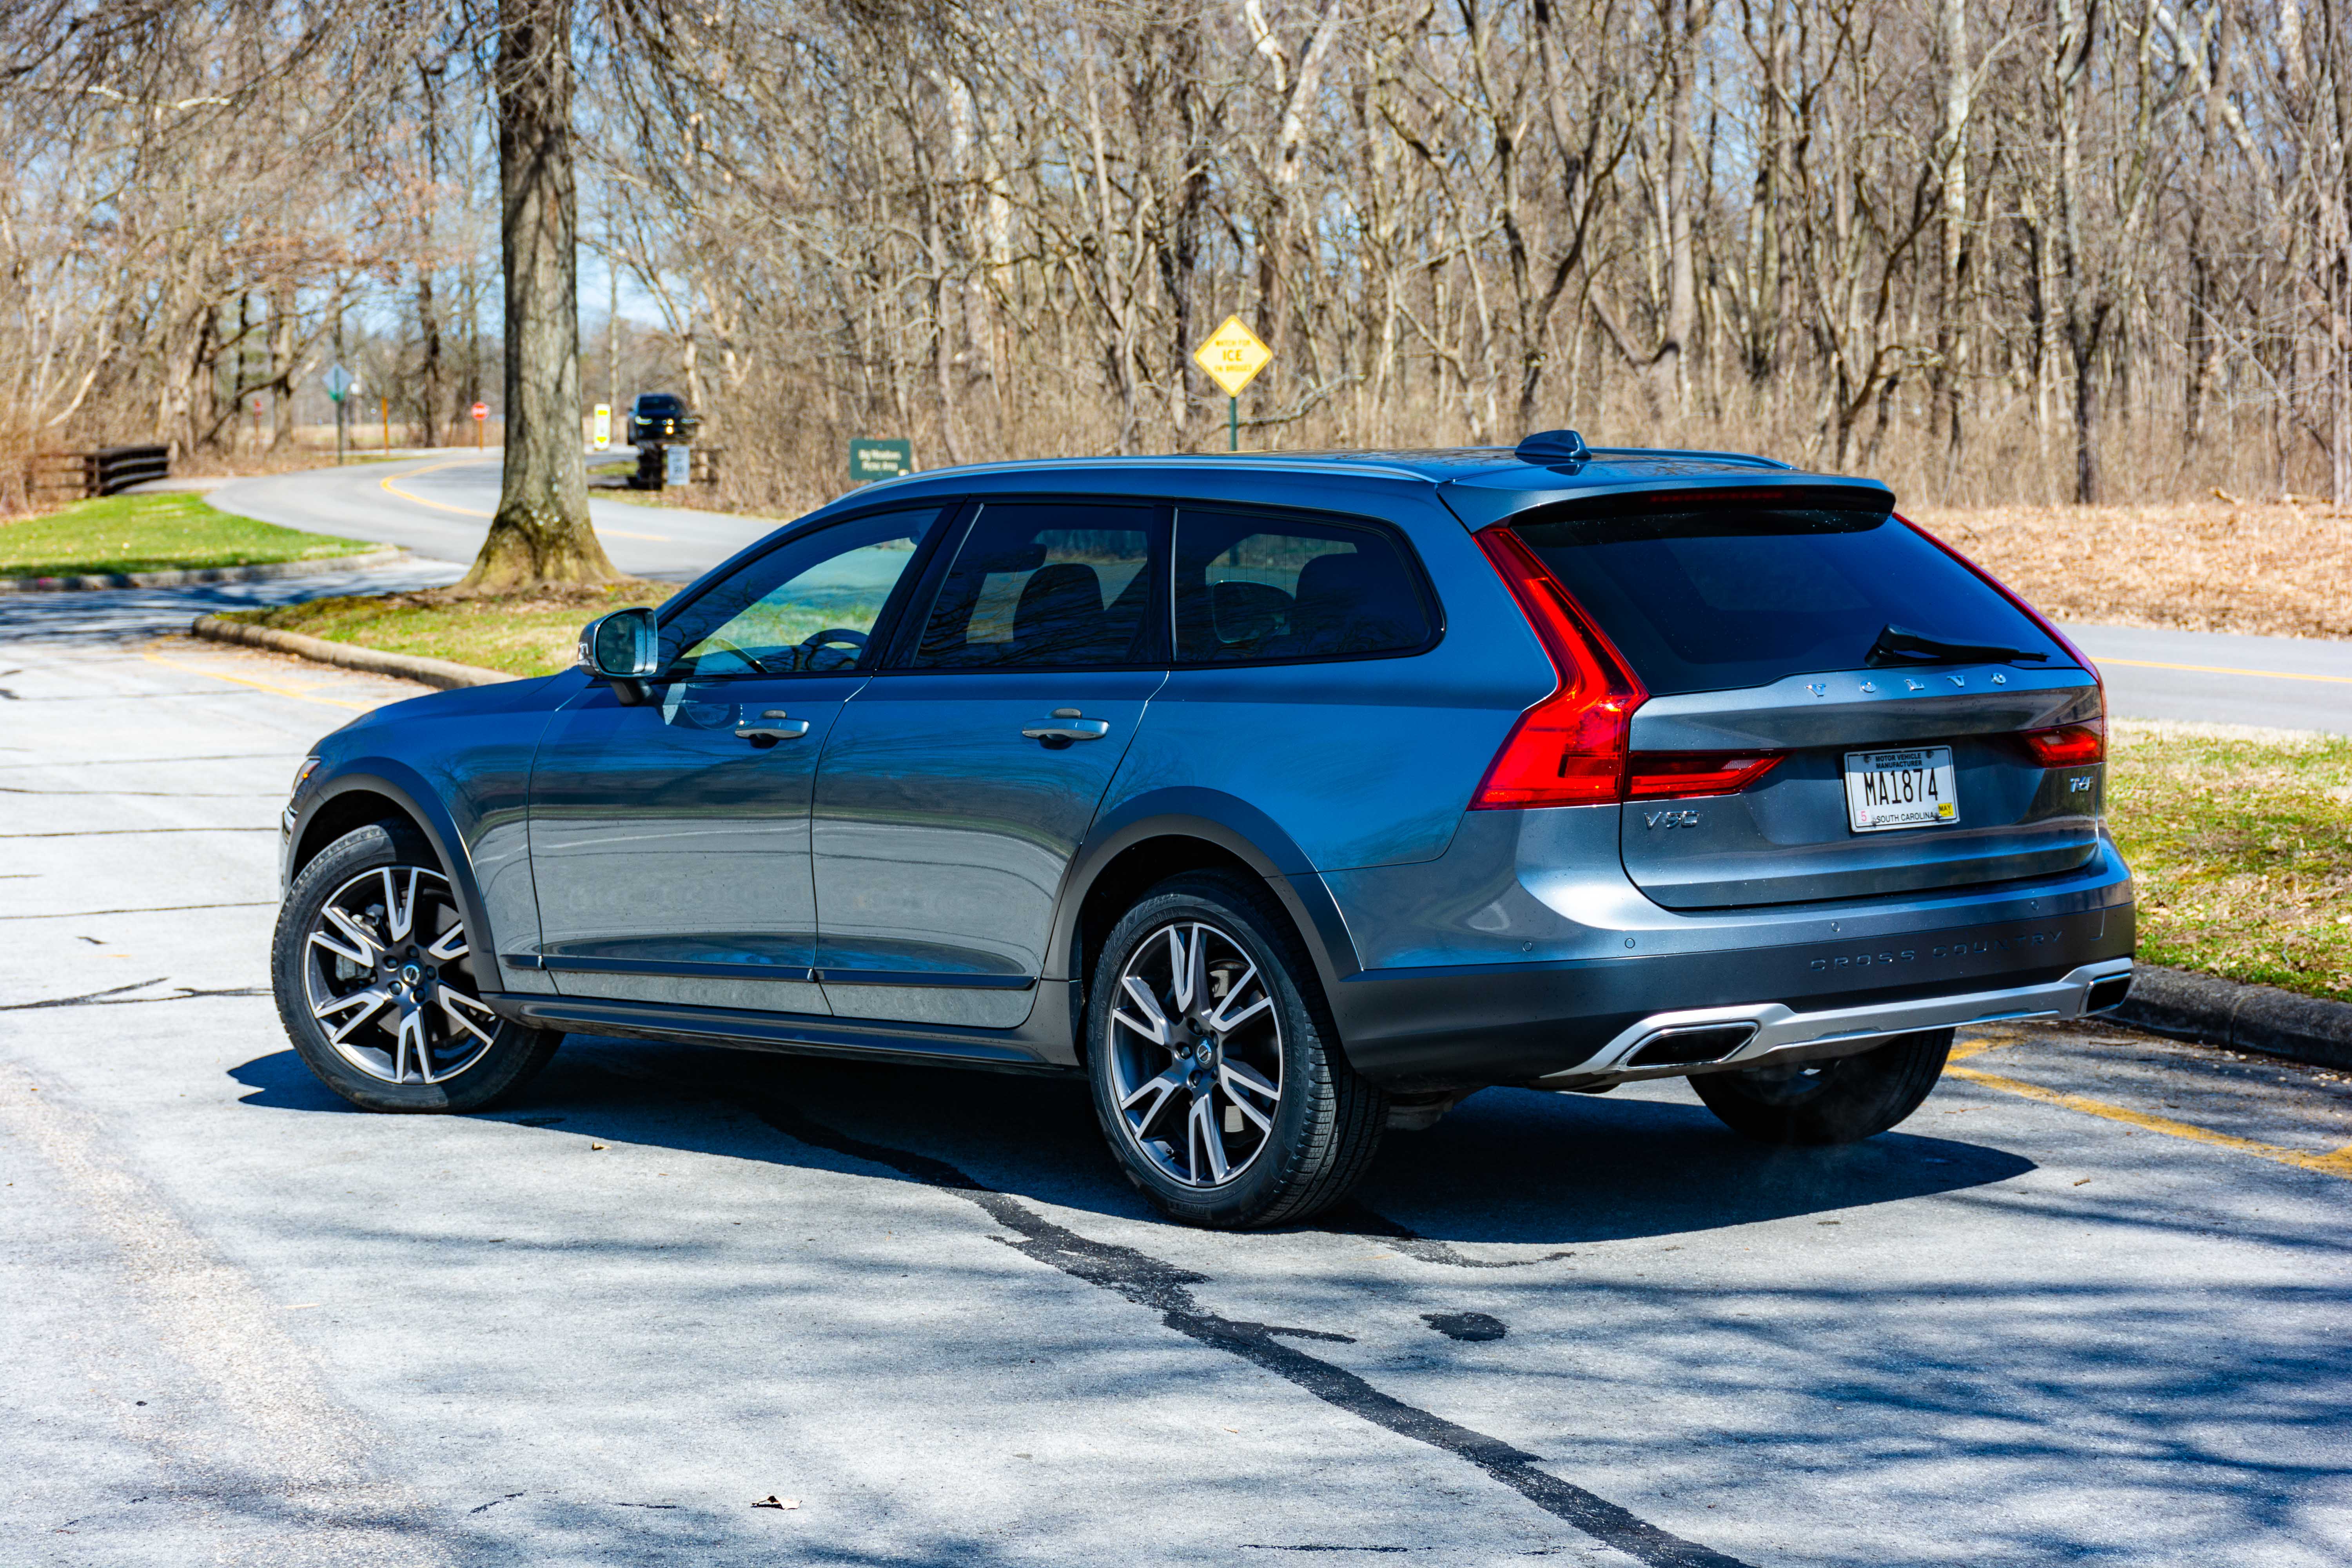 Volvo V90 Cross Country exterior specifications